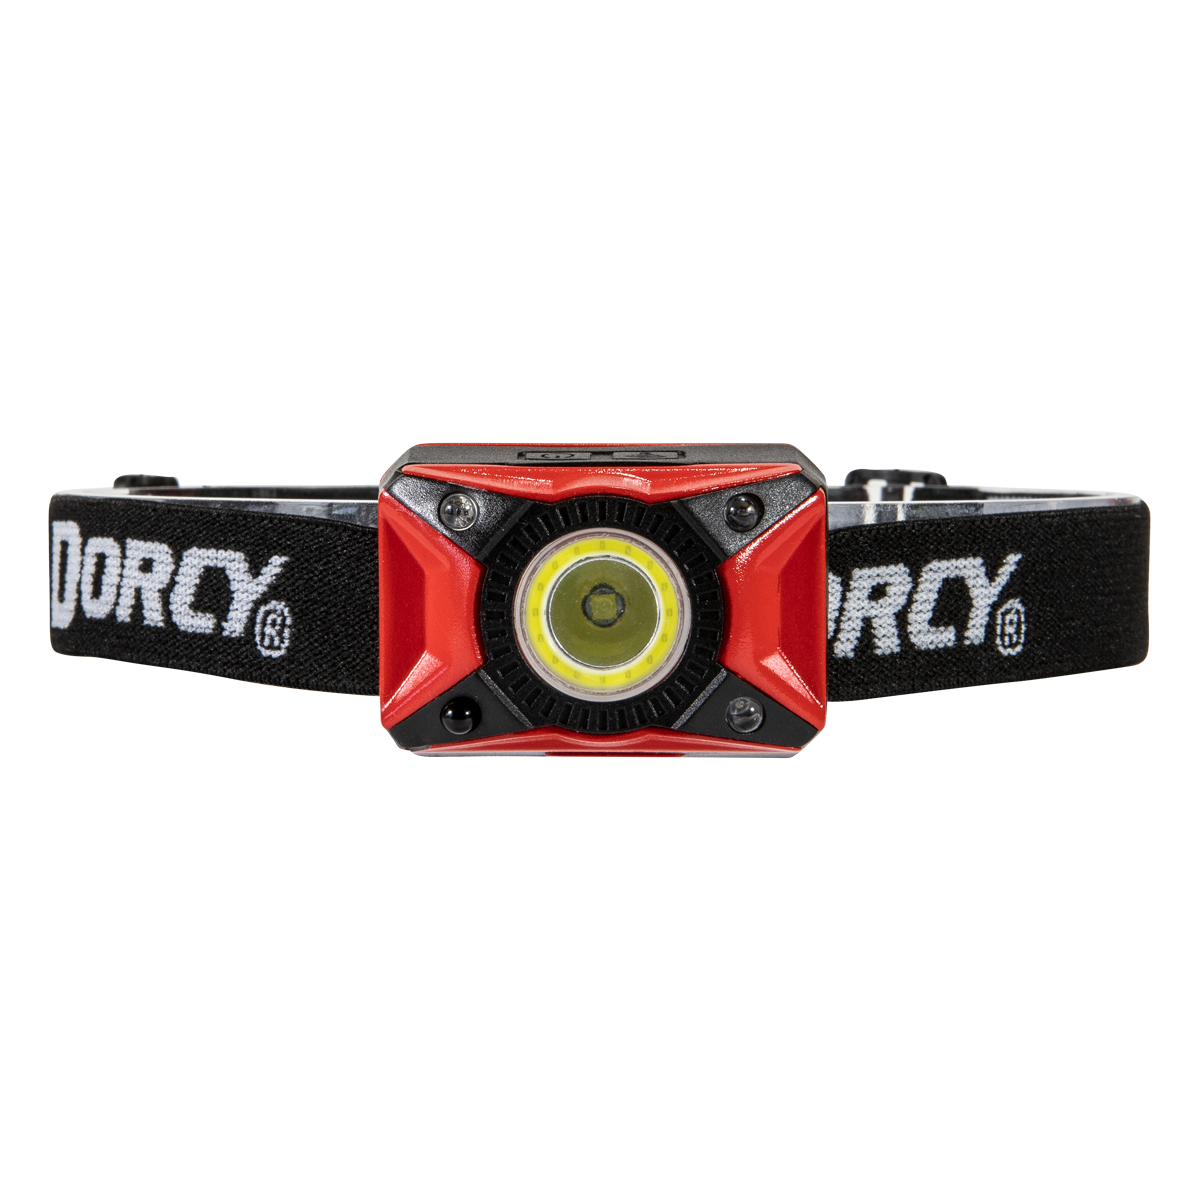 650-Lumen LED Rechargeable Headlamp (Battery Included) | - Dorcy International 41-4337